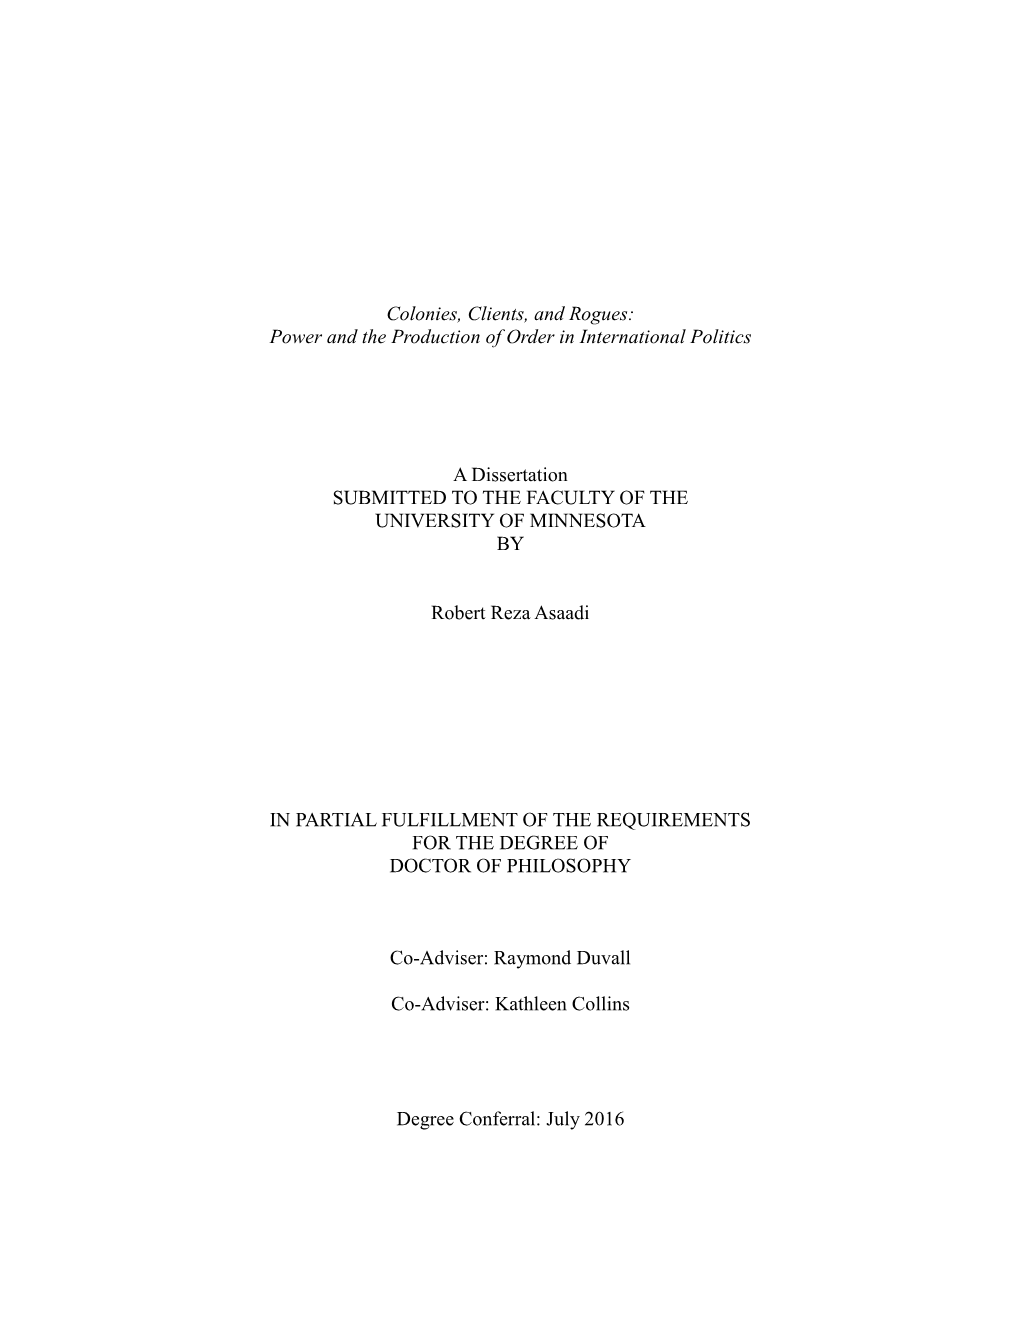 Colonies, Clients, and Rogues: Power and the Production of Order in International Politics a Dissertation SUBMITTED to the FACUL